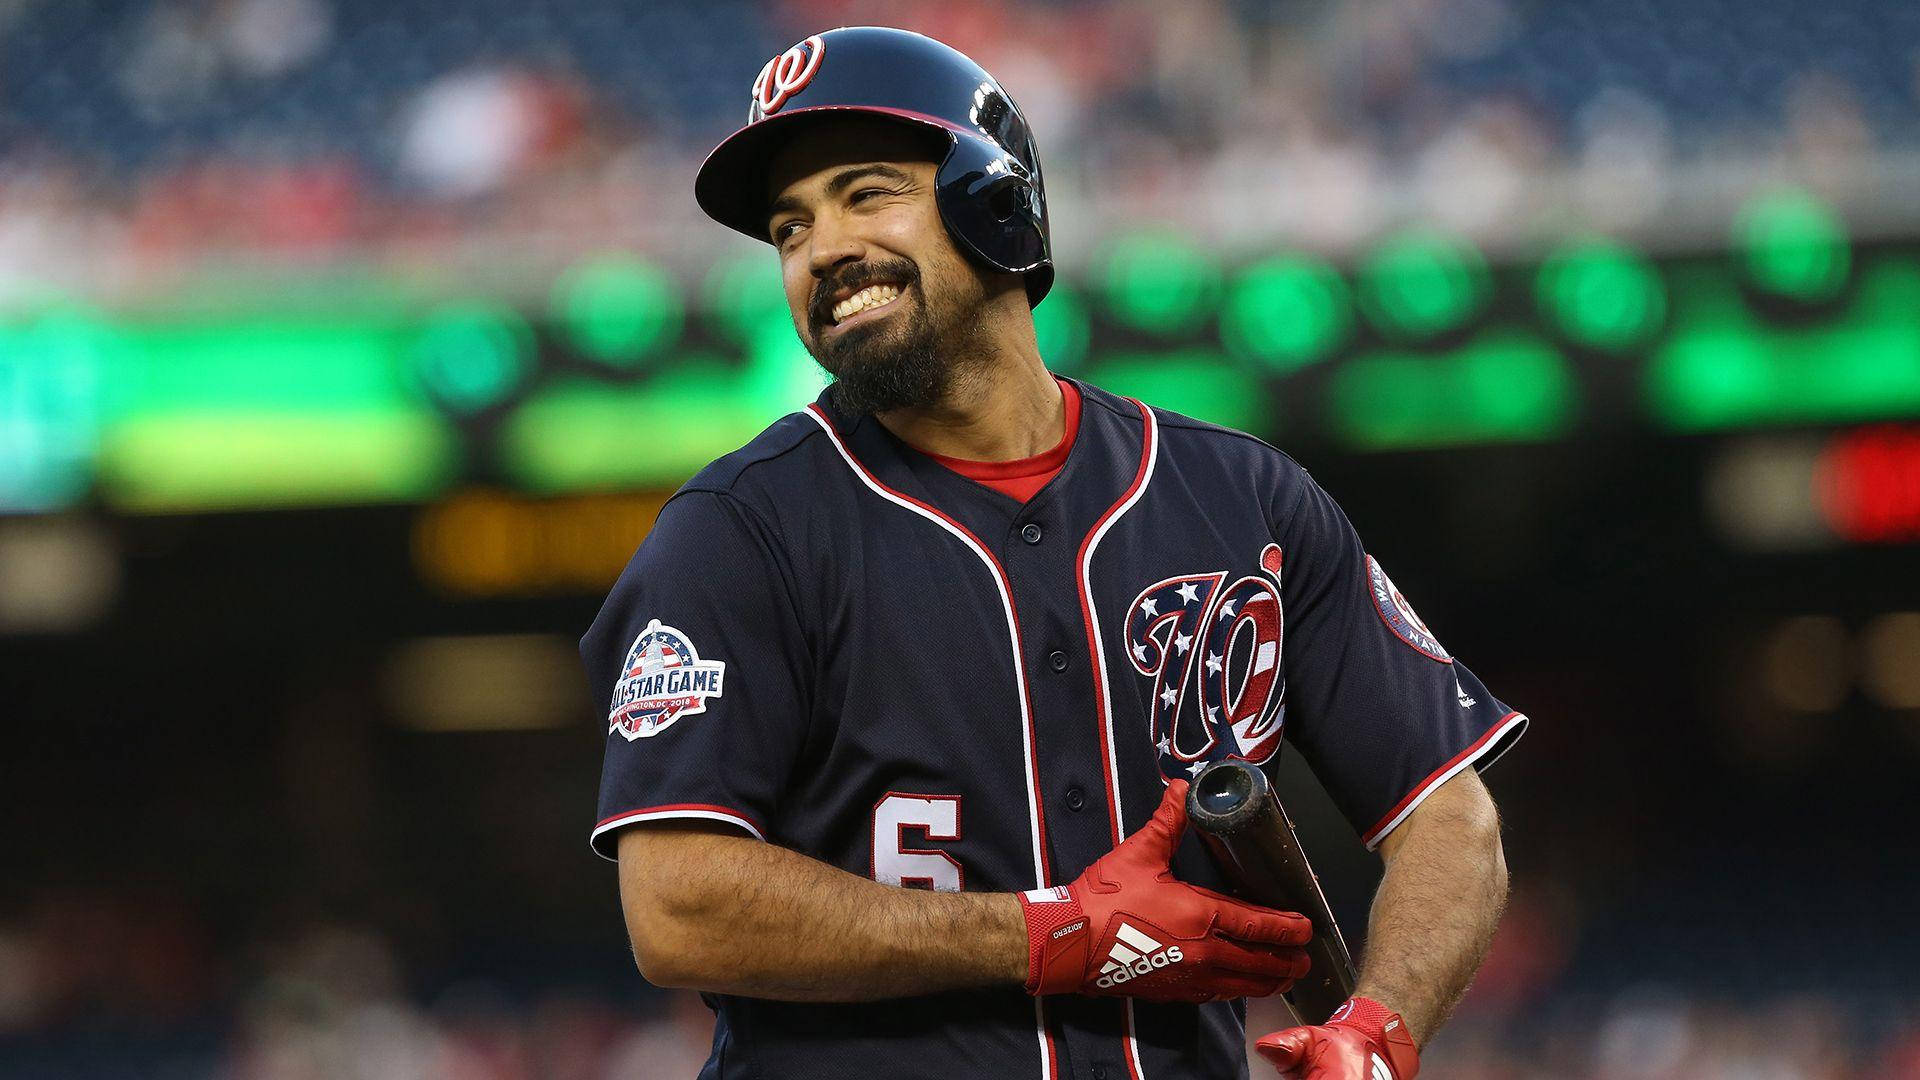 Anthony Rendon Grinning In Uniform Background